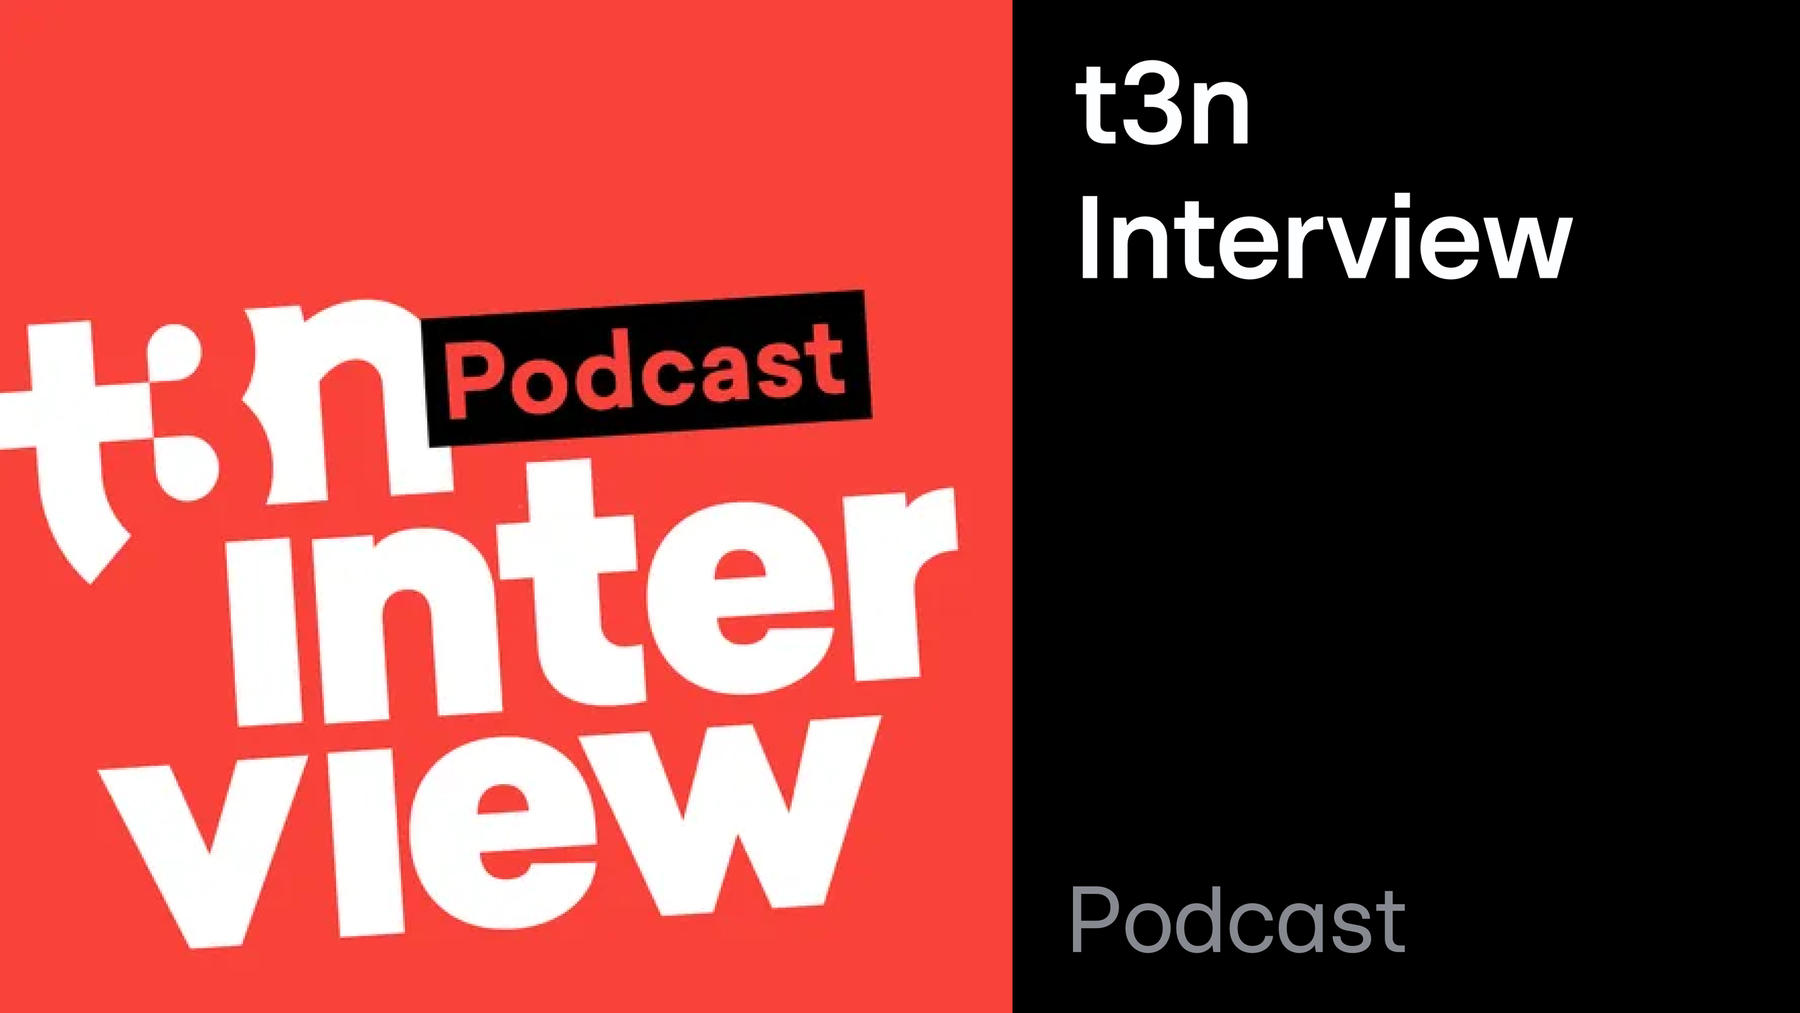 Podcast: t3n Interview